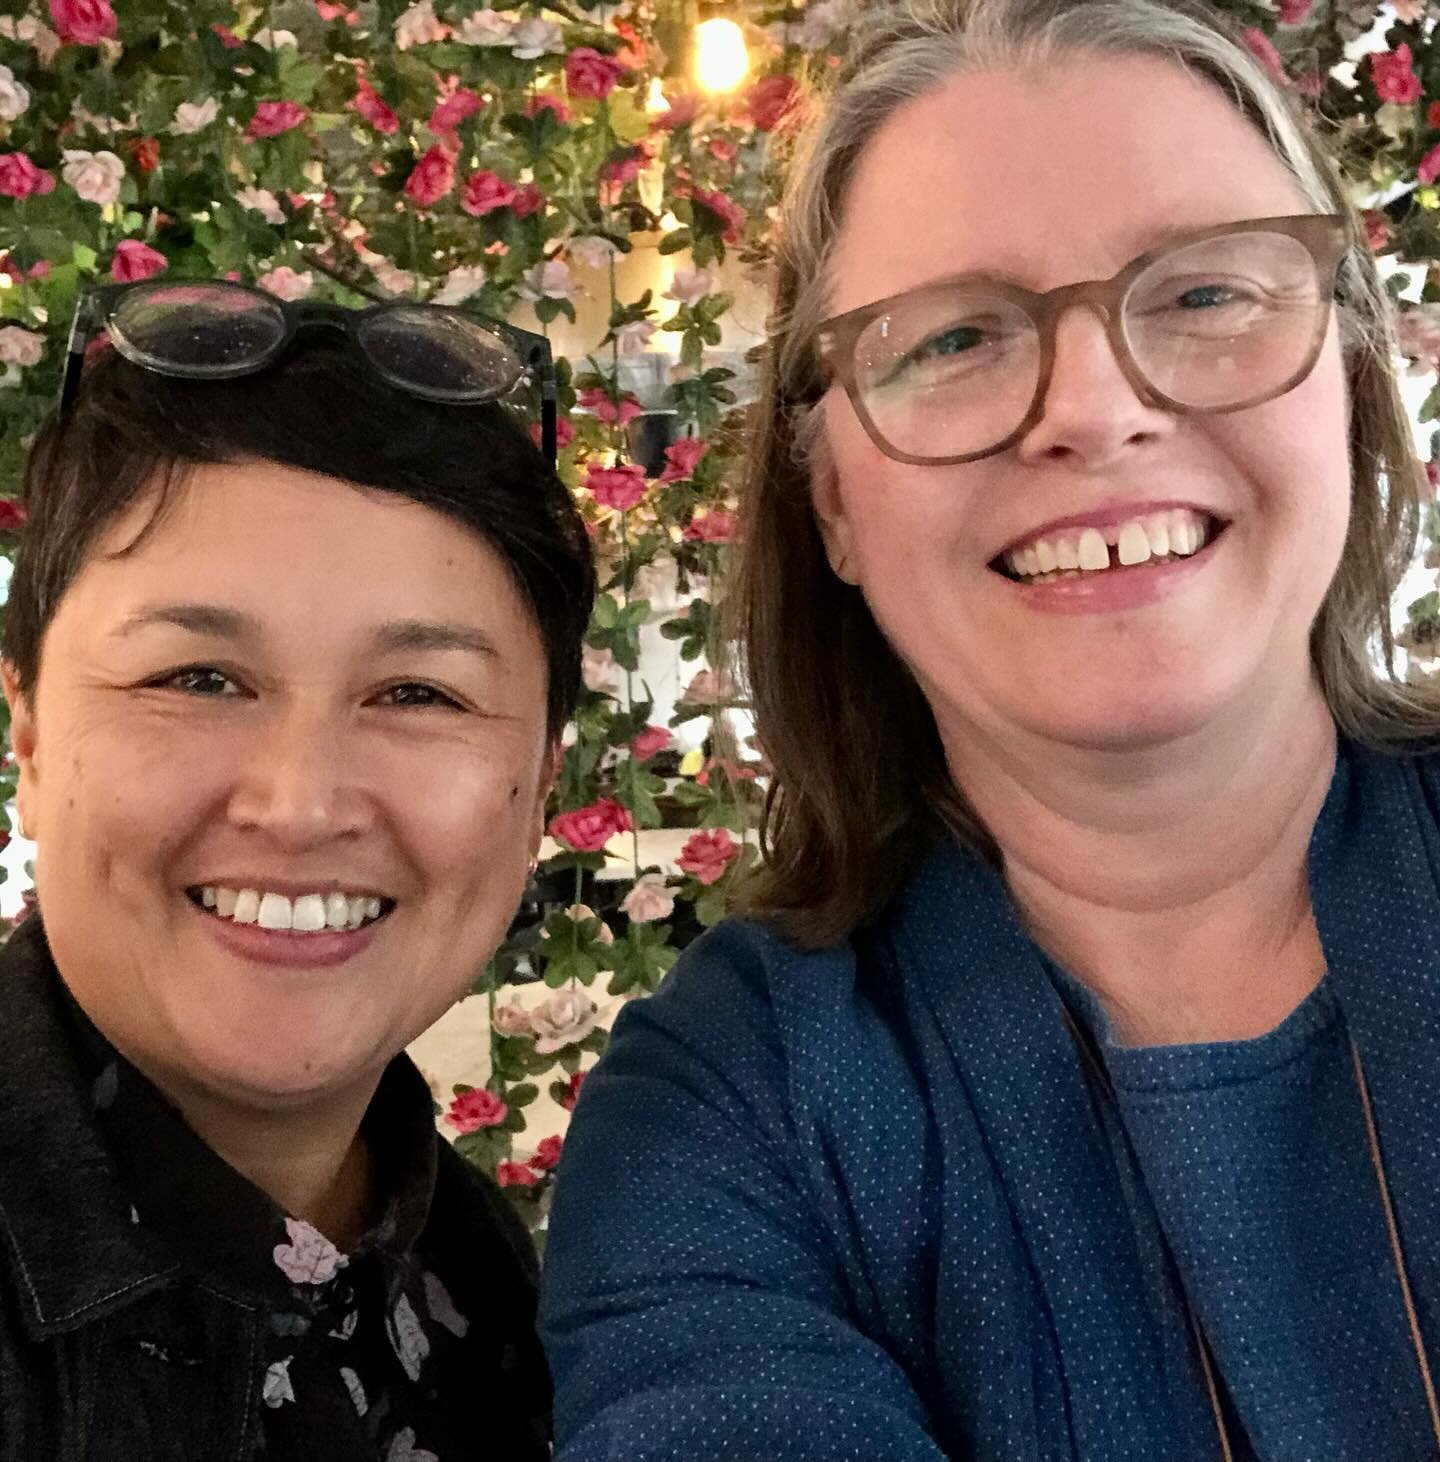 Me Made May Day 15
#fridaypatterncompany #ilfordjacket
#closetcorepatterns #kalleshirt
#naniirotaperedpants

It wouldn&rsquo;t be Me Made May without a meetup with @citysews Good company and conversation. Bonus, we took each others &ldquo;me made&rdq